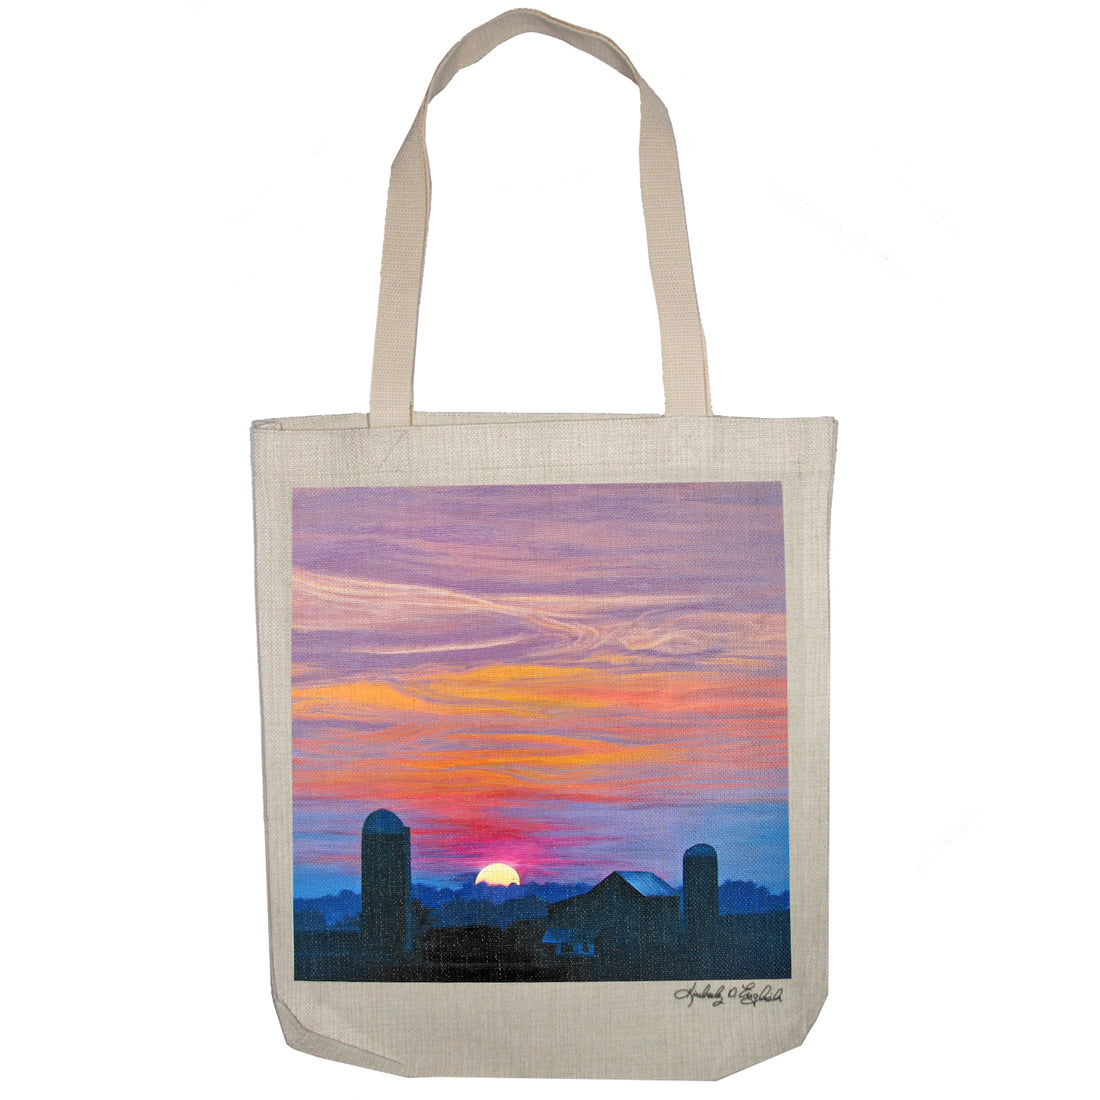 Distant Vista on Shirley Road Tote Bag